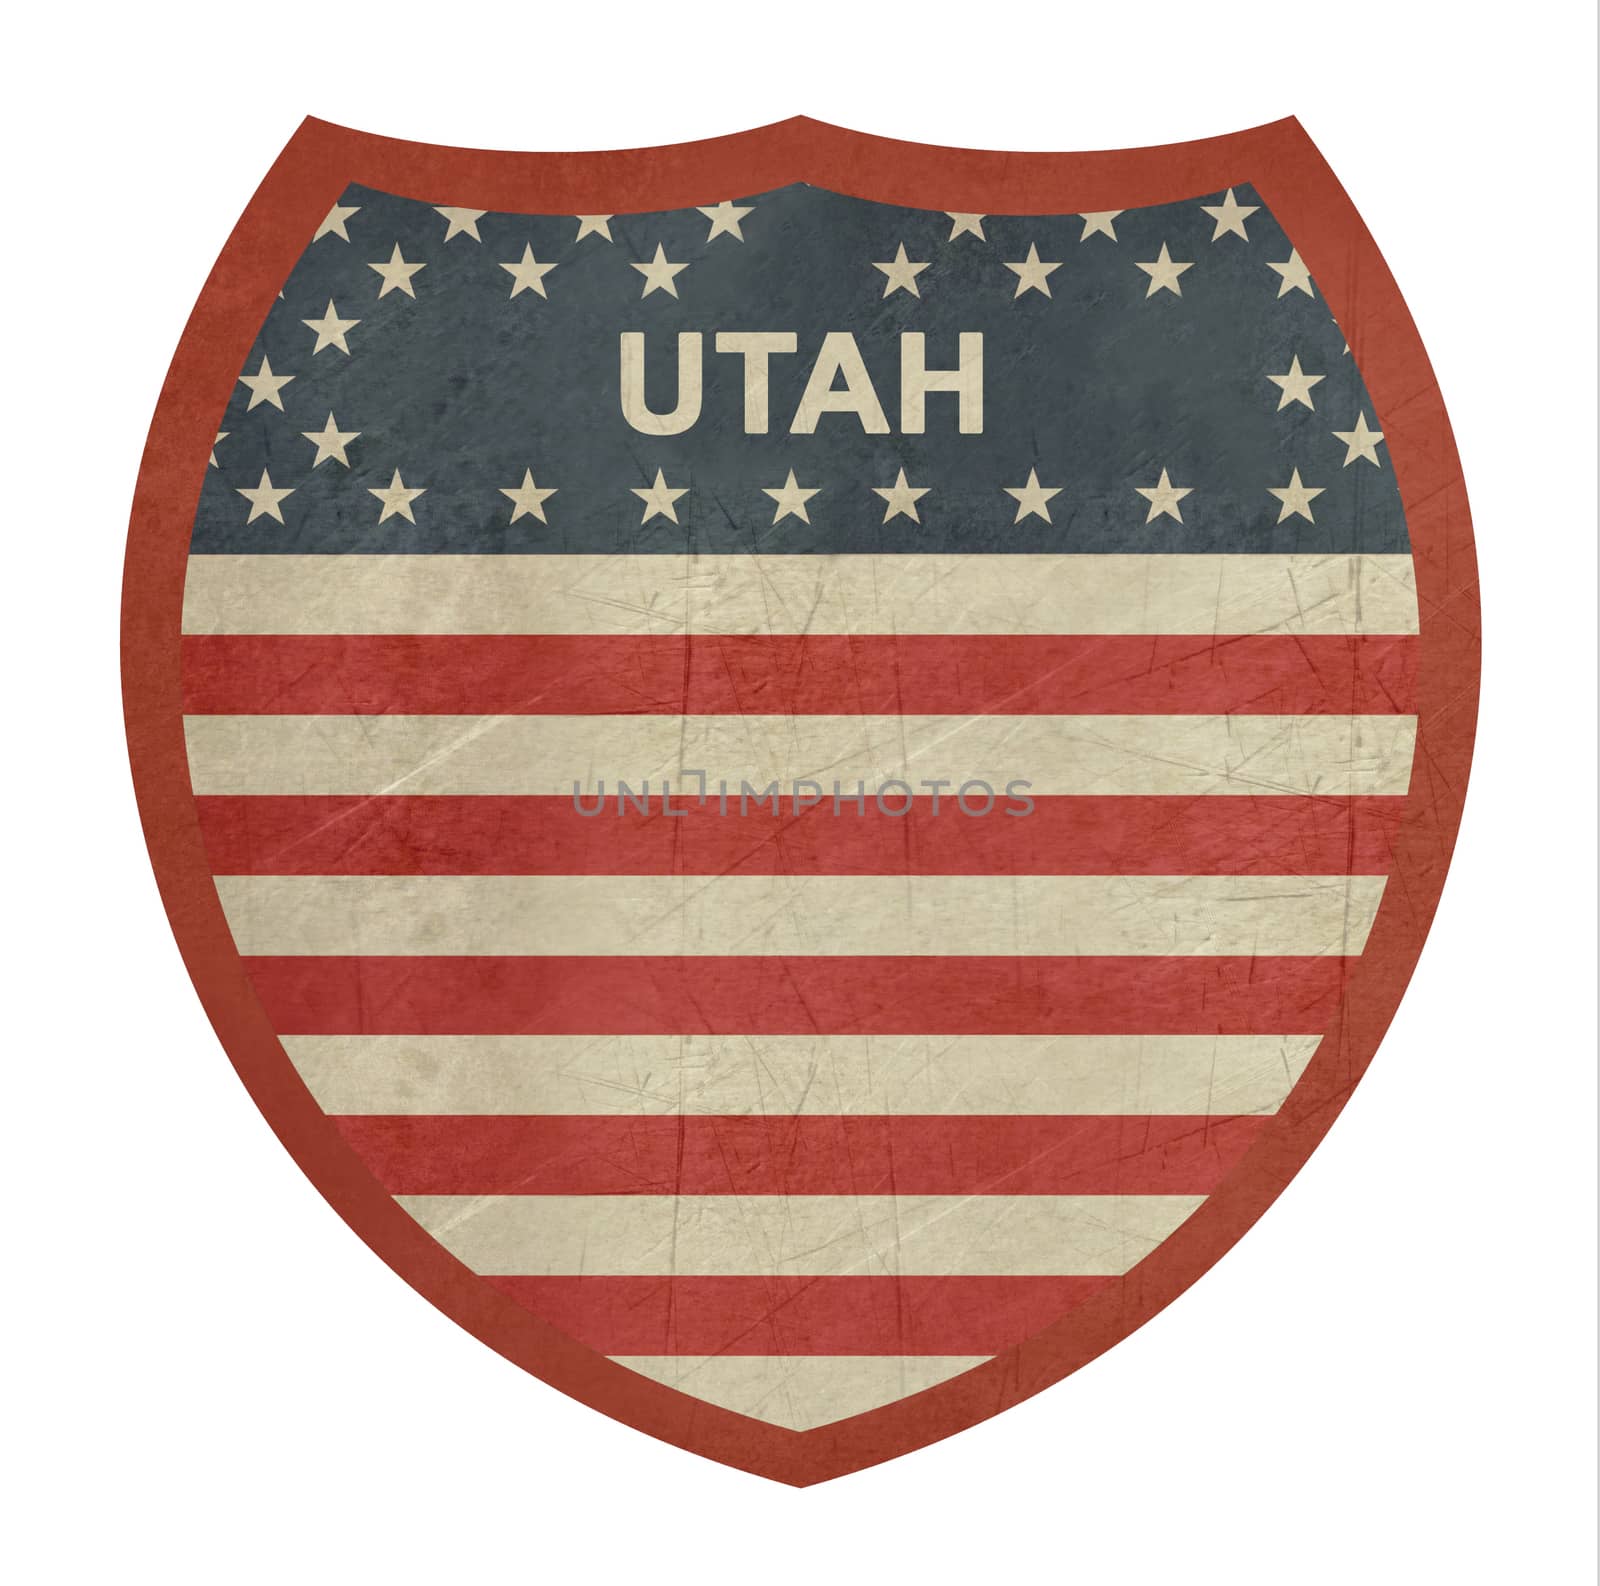 Grunge Utah American interstate highway sign isolated on a white background.